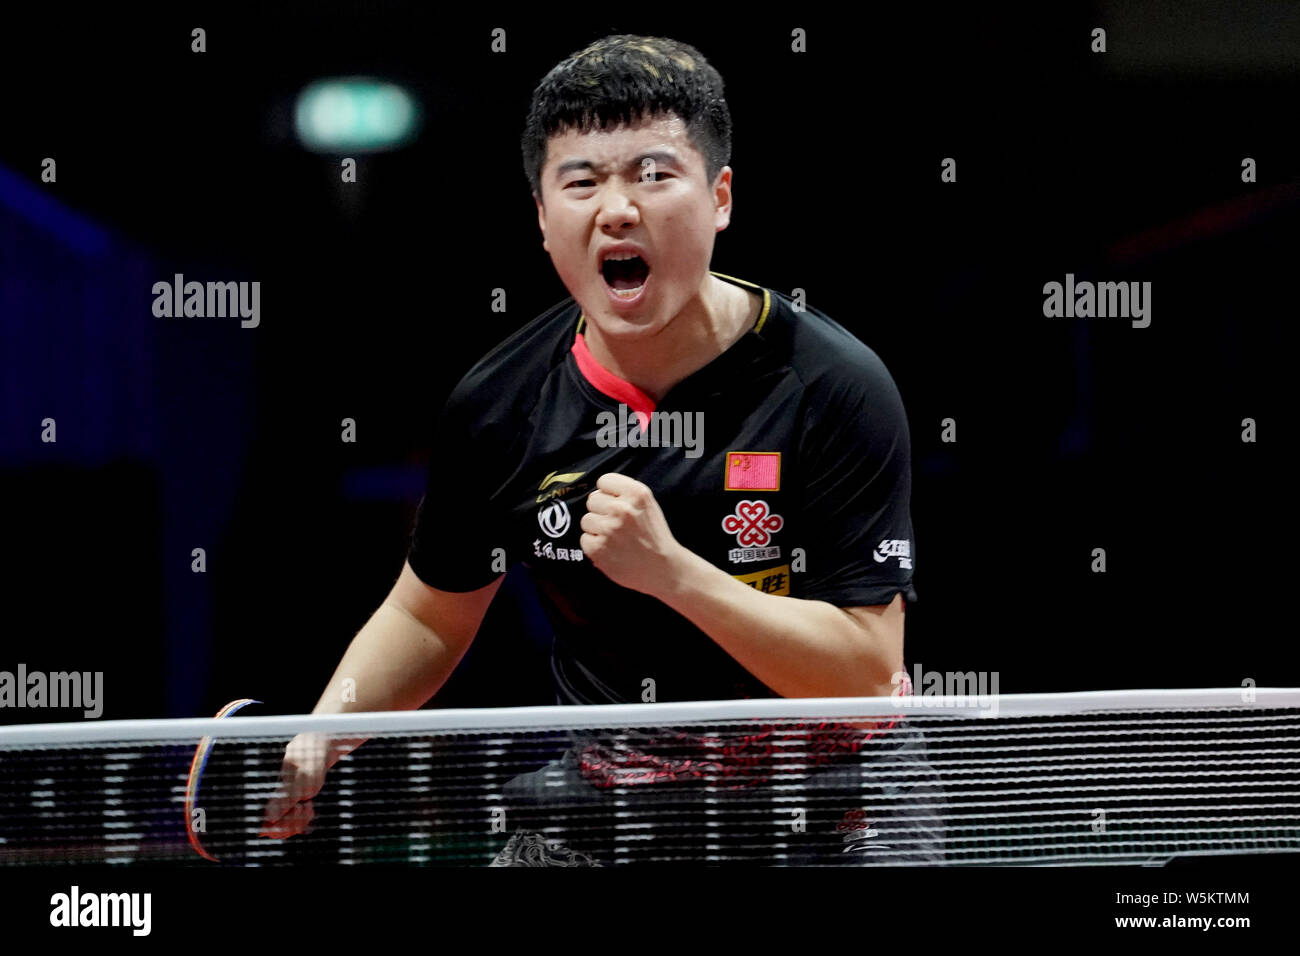 Liang Jingkun of China celebrates after scoring against Panagiotis Gionis of Greece in their third round match of Men's Singles during the Liebherr 20 Stock Photo